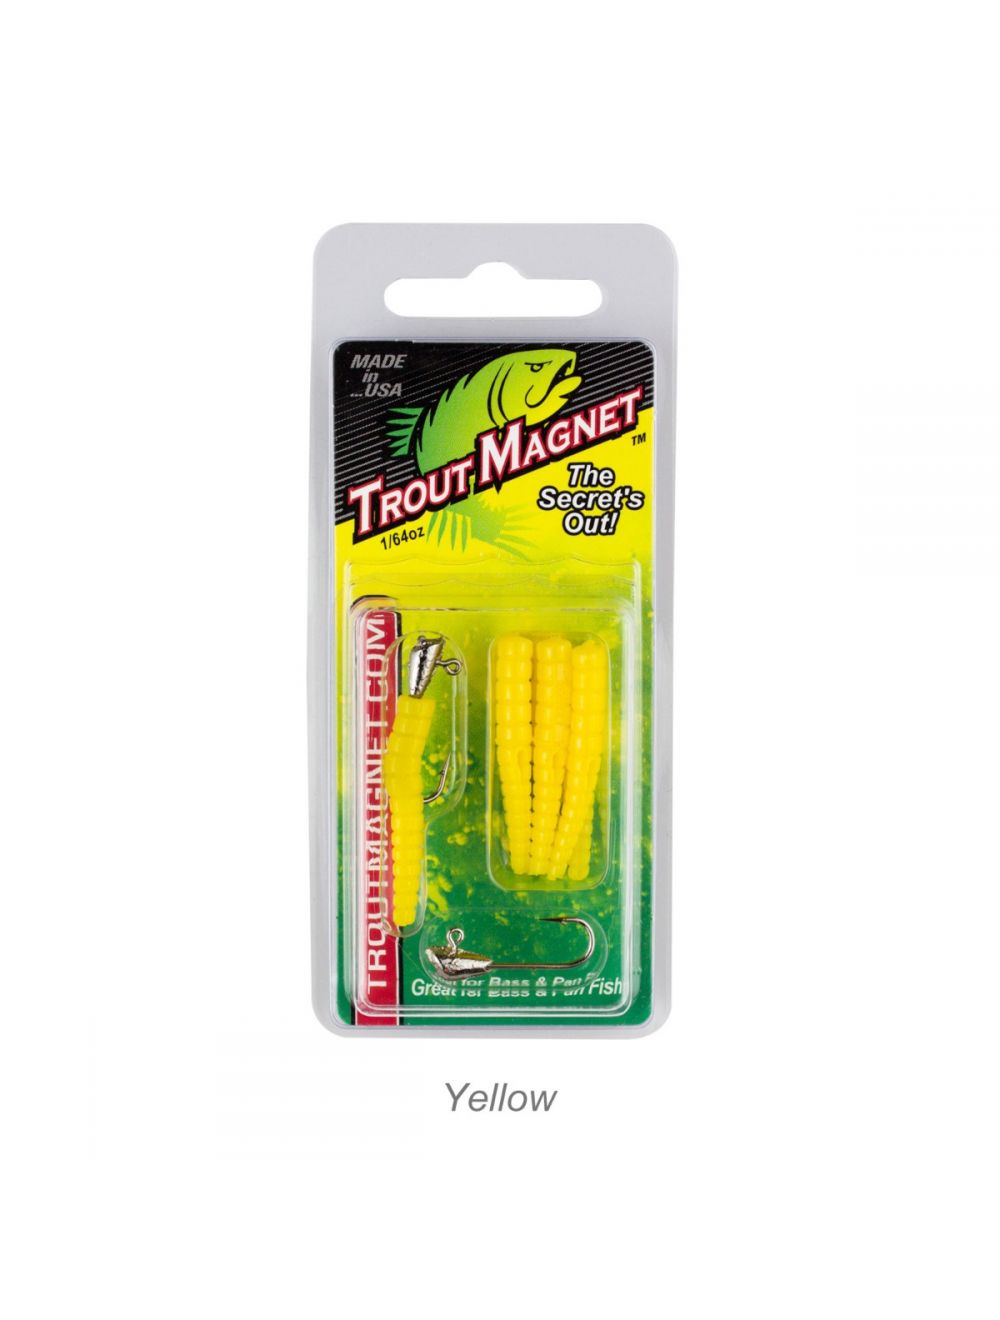 Leland Lures Trout Magnet 9pc Packs - Yellow